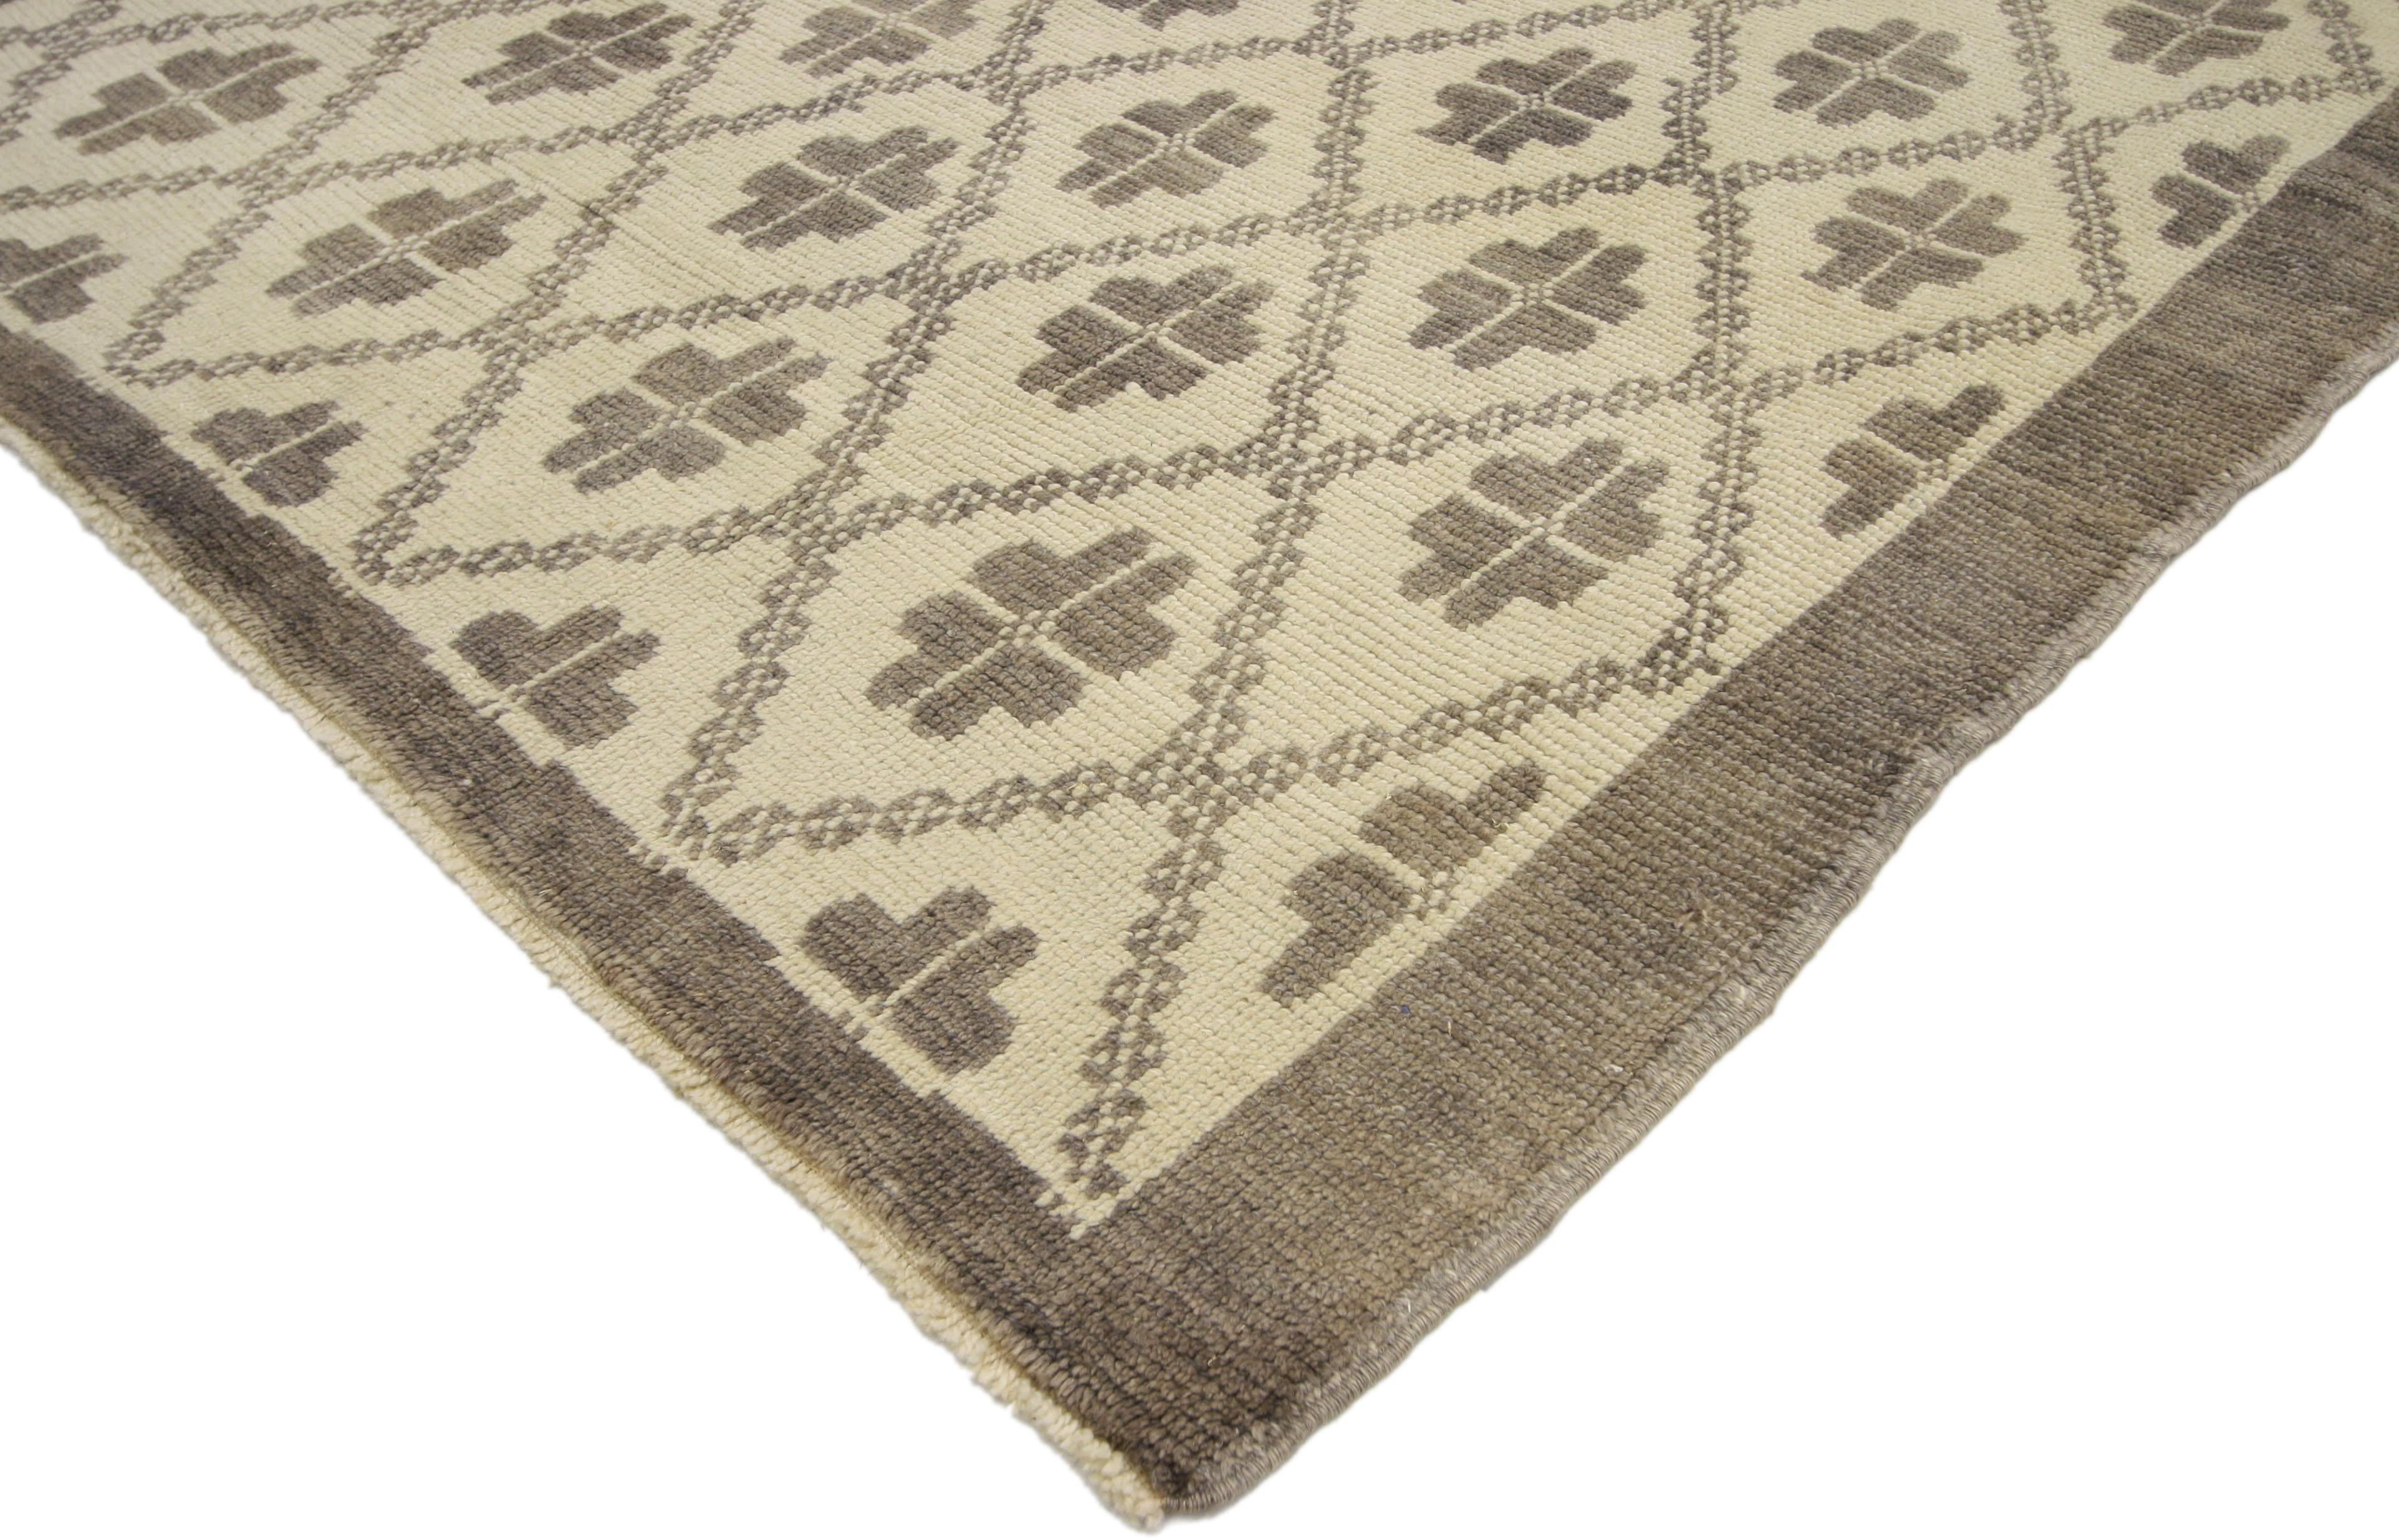 52383 Rustic French Country Style Vintage Turkish Oushak Rug, Kitchen, Foyer or Entry Rug 04'08 x 07'01. With relaxed elegance and comfortable refinement, this hand knotted wool vintage Turkish Oushak rug with rustic French Country style boasts a